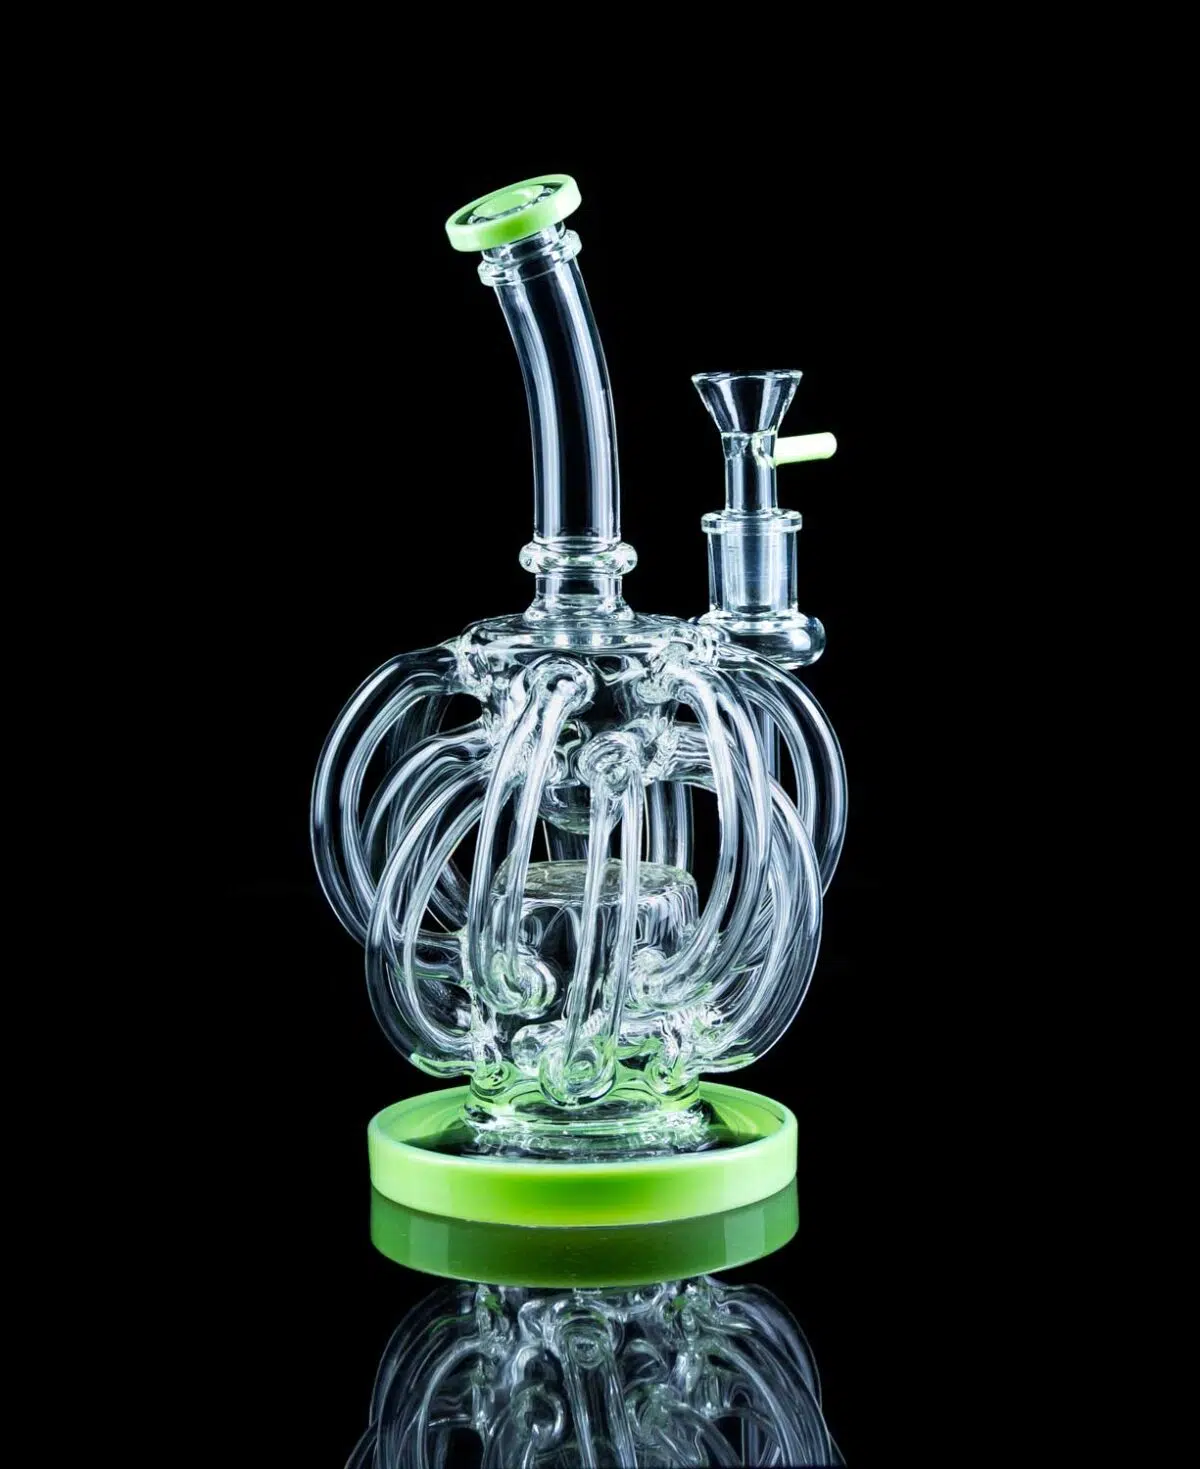 recycler bongs made from borosilicate glass with multiple arms